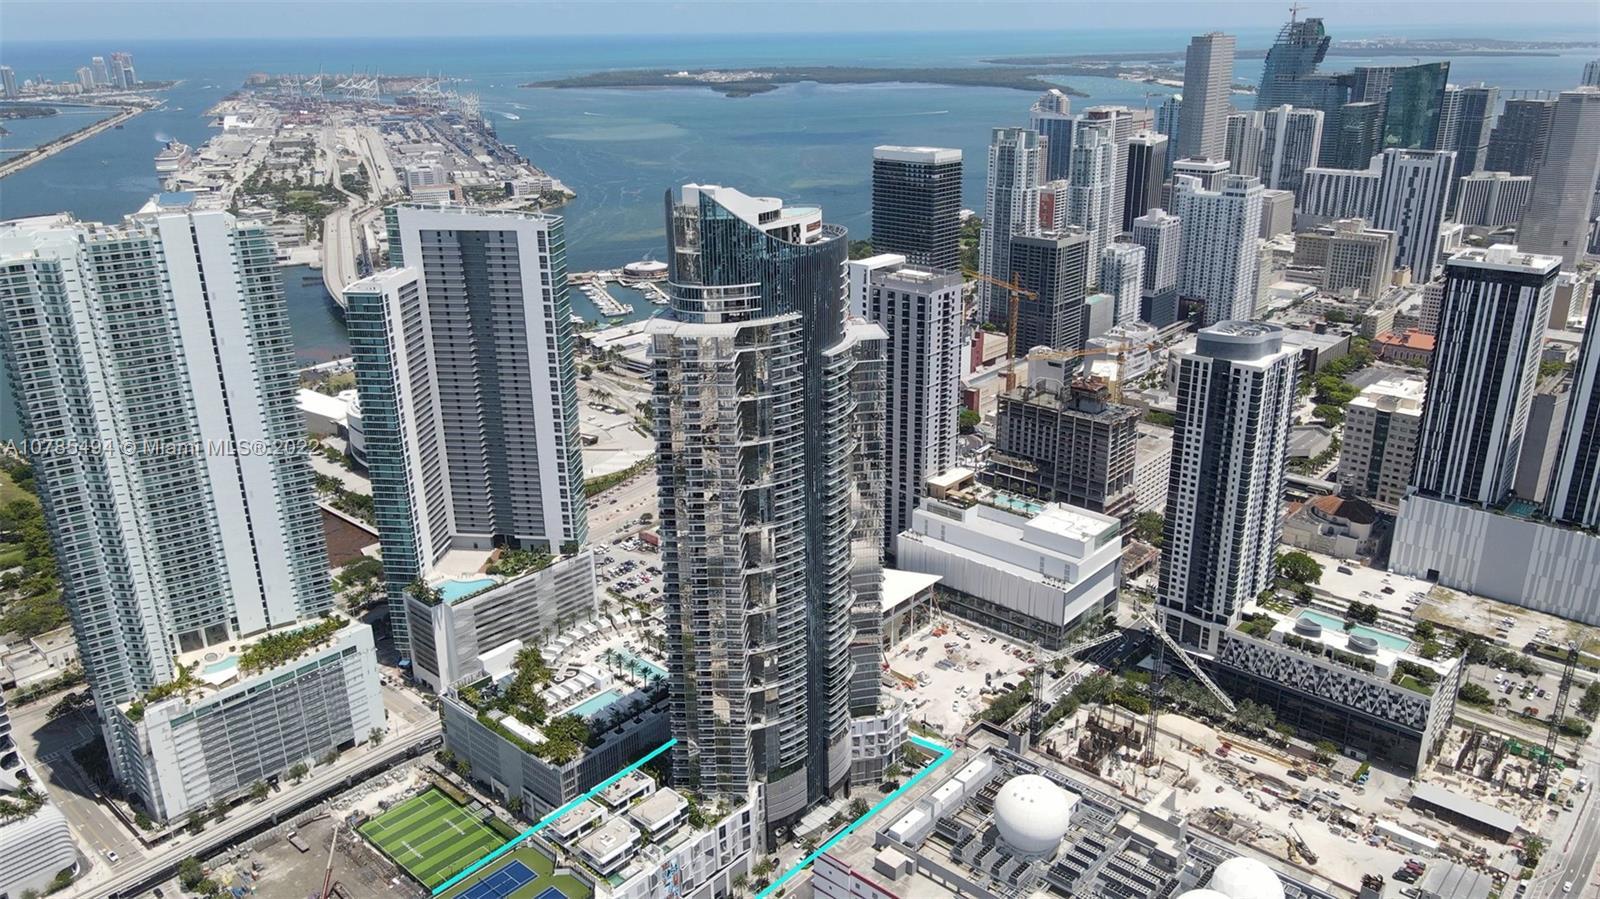 Paramount Conveniently located next to interstate 95 and 395, several metromover stations, and adjac